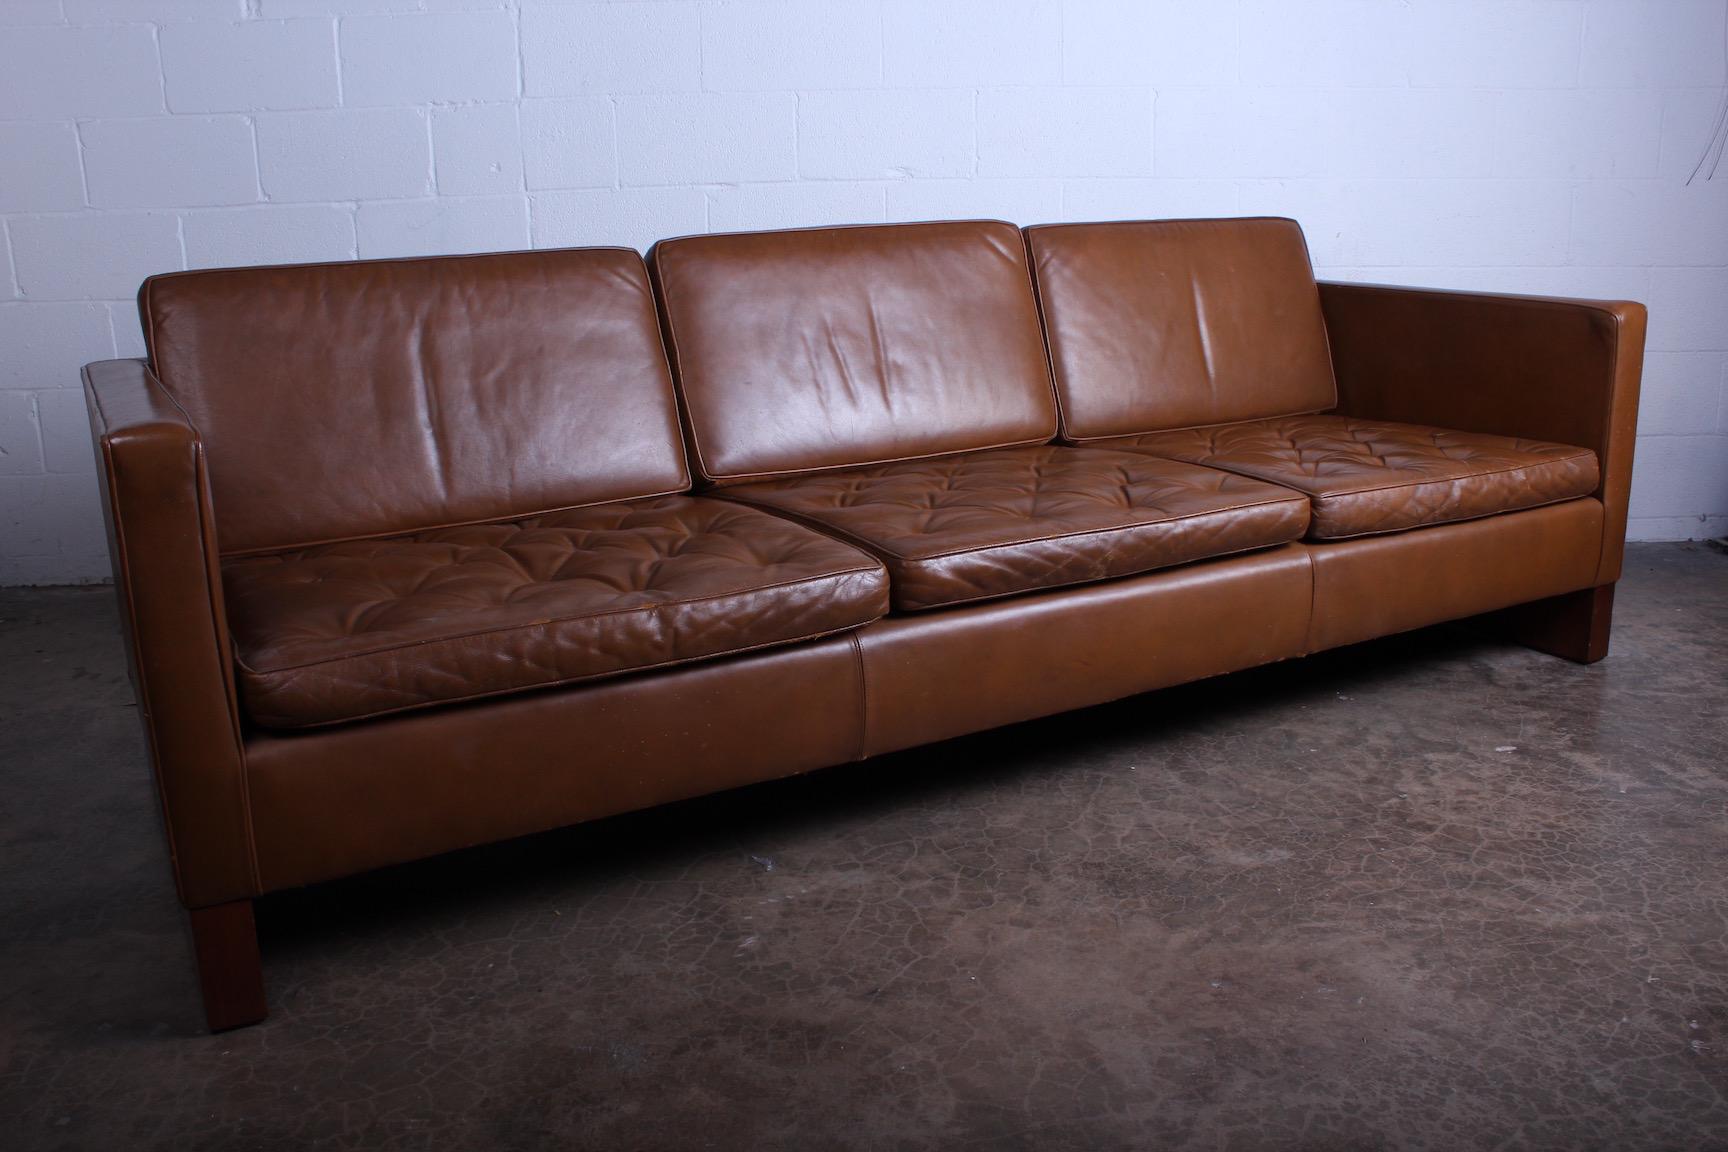 Mid-20th Century Leather Sofa Designed by Mies van der Rohe for Knoll